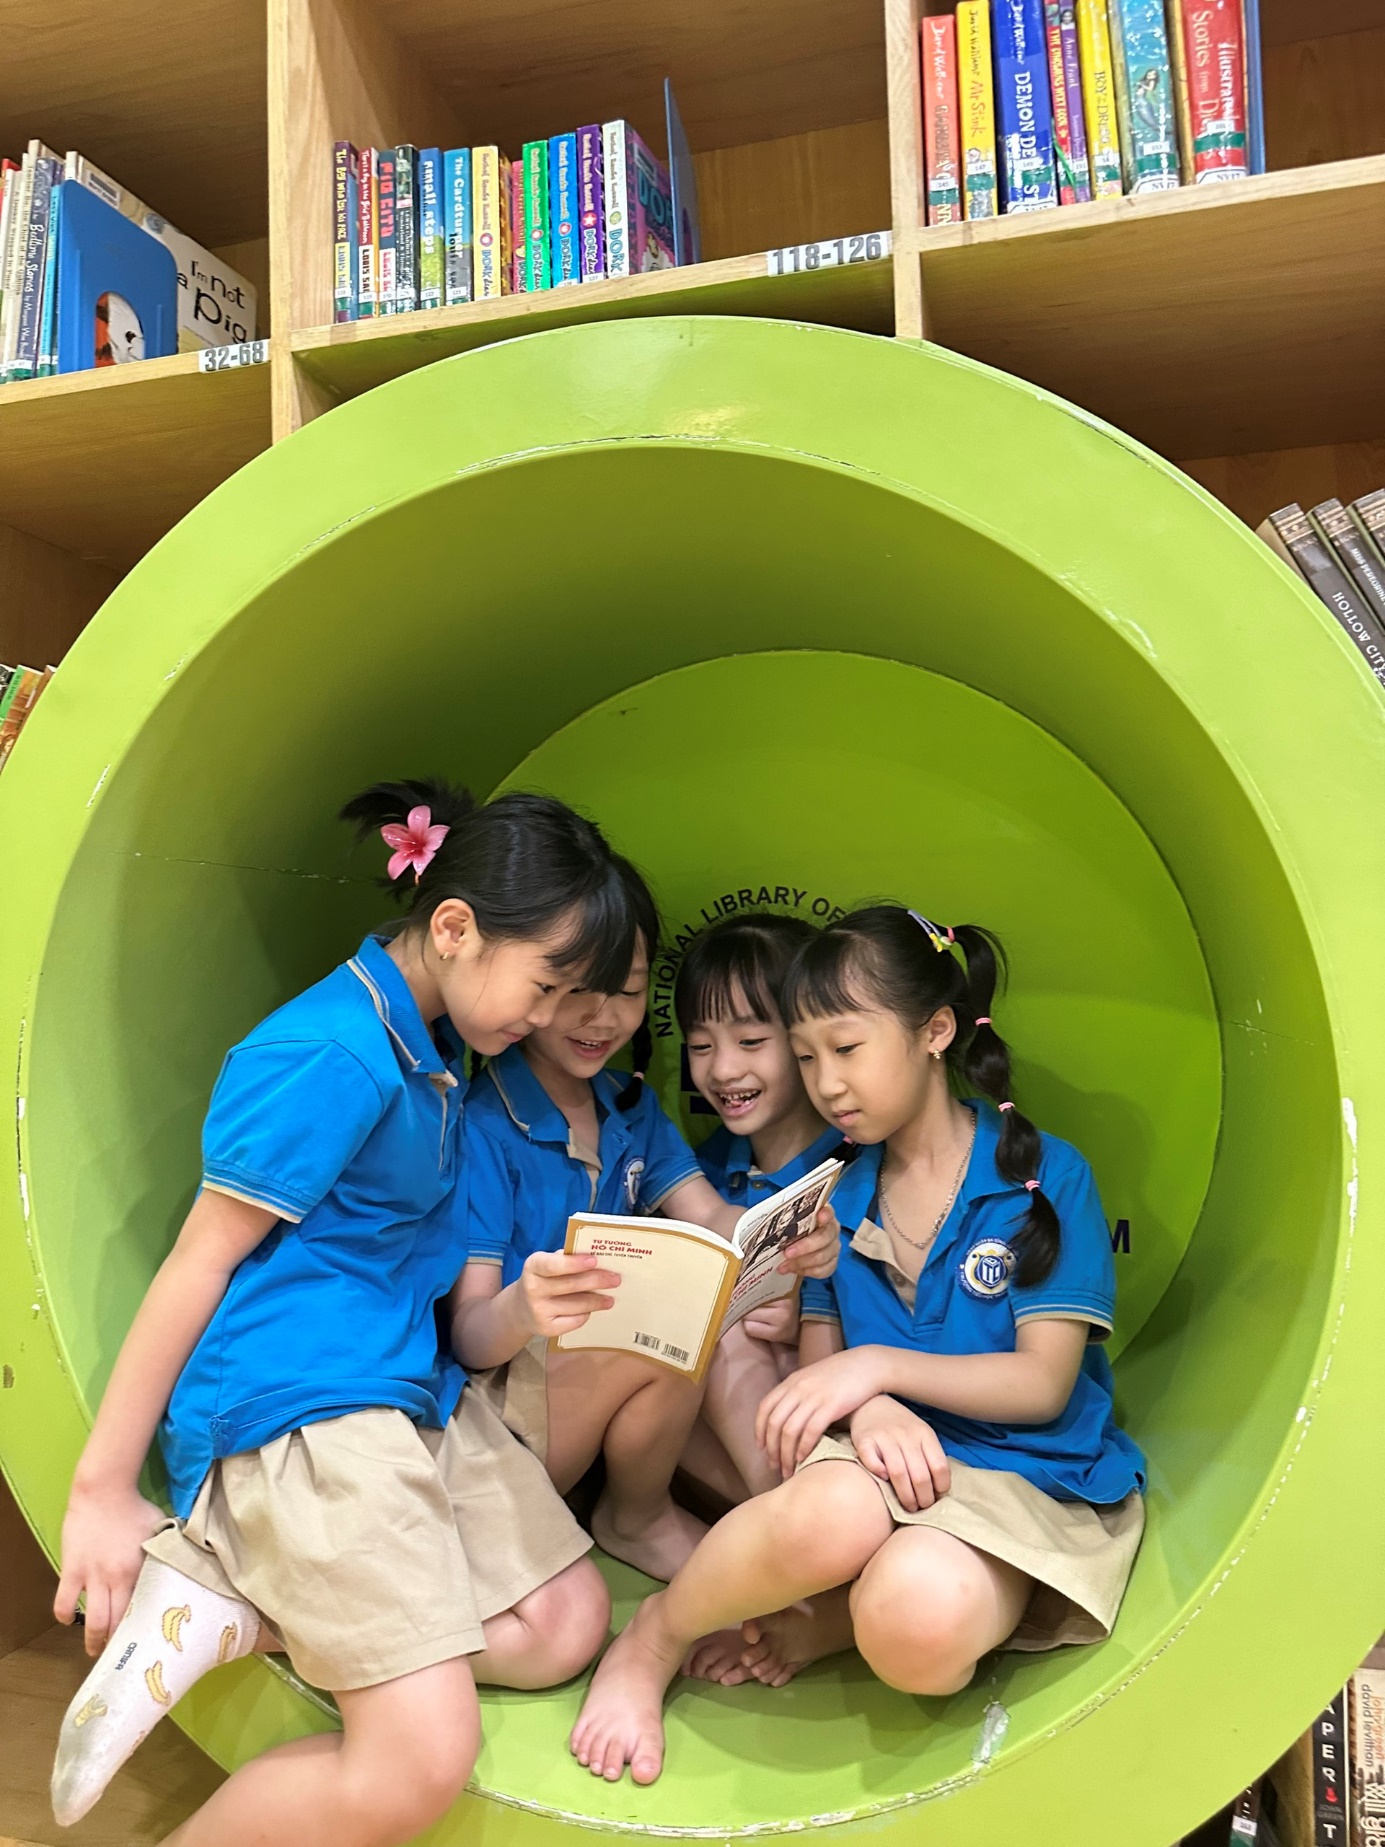 A group of girls sitting on a green tube reading a book

Description automatically generated